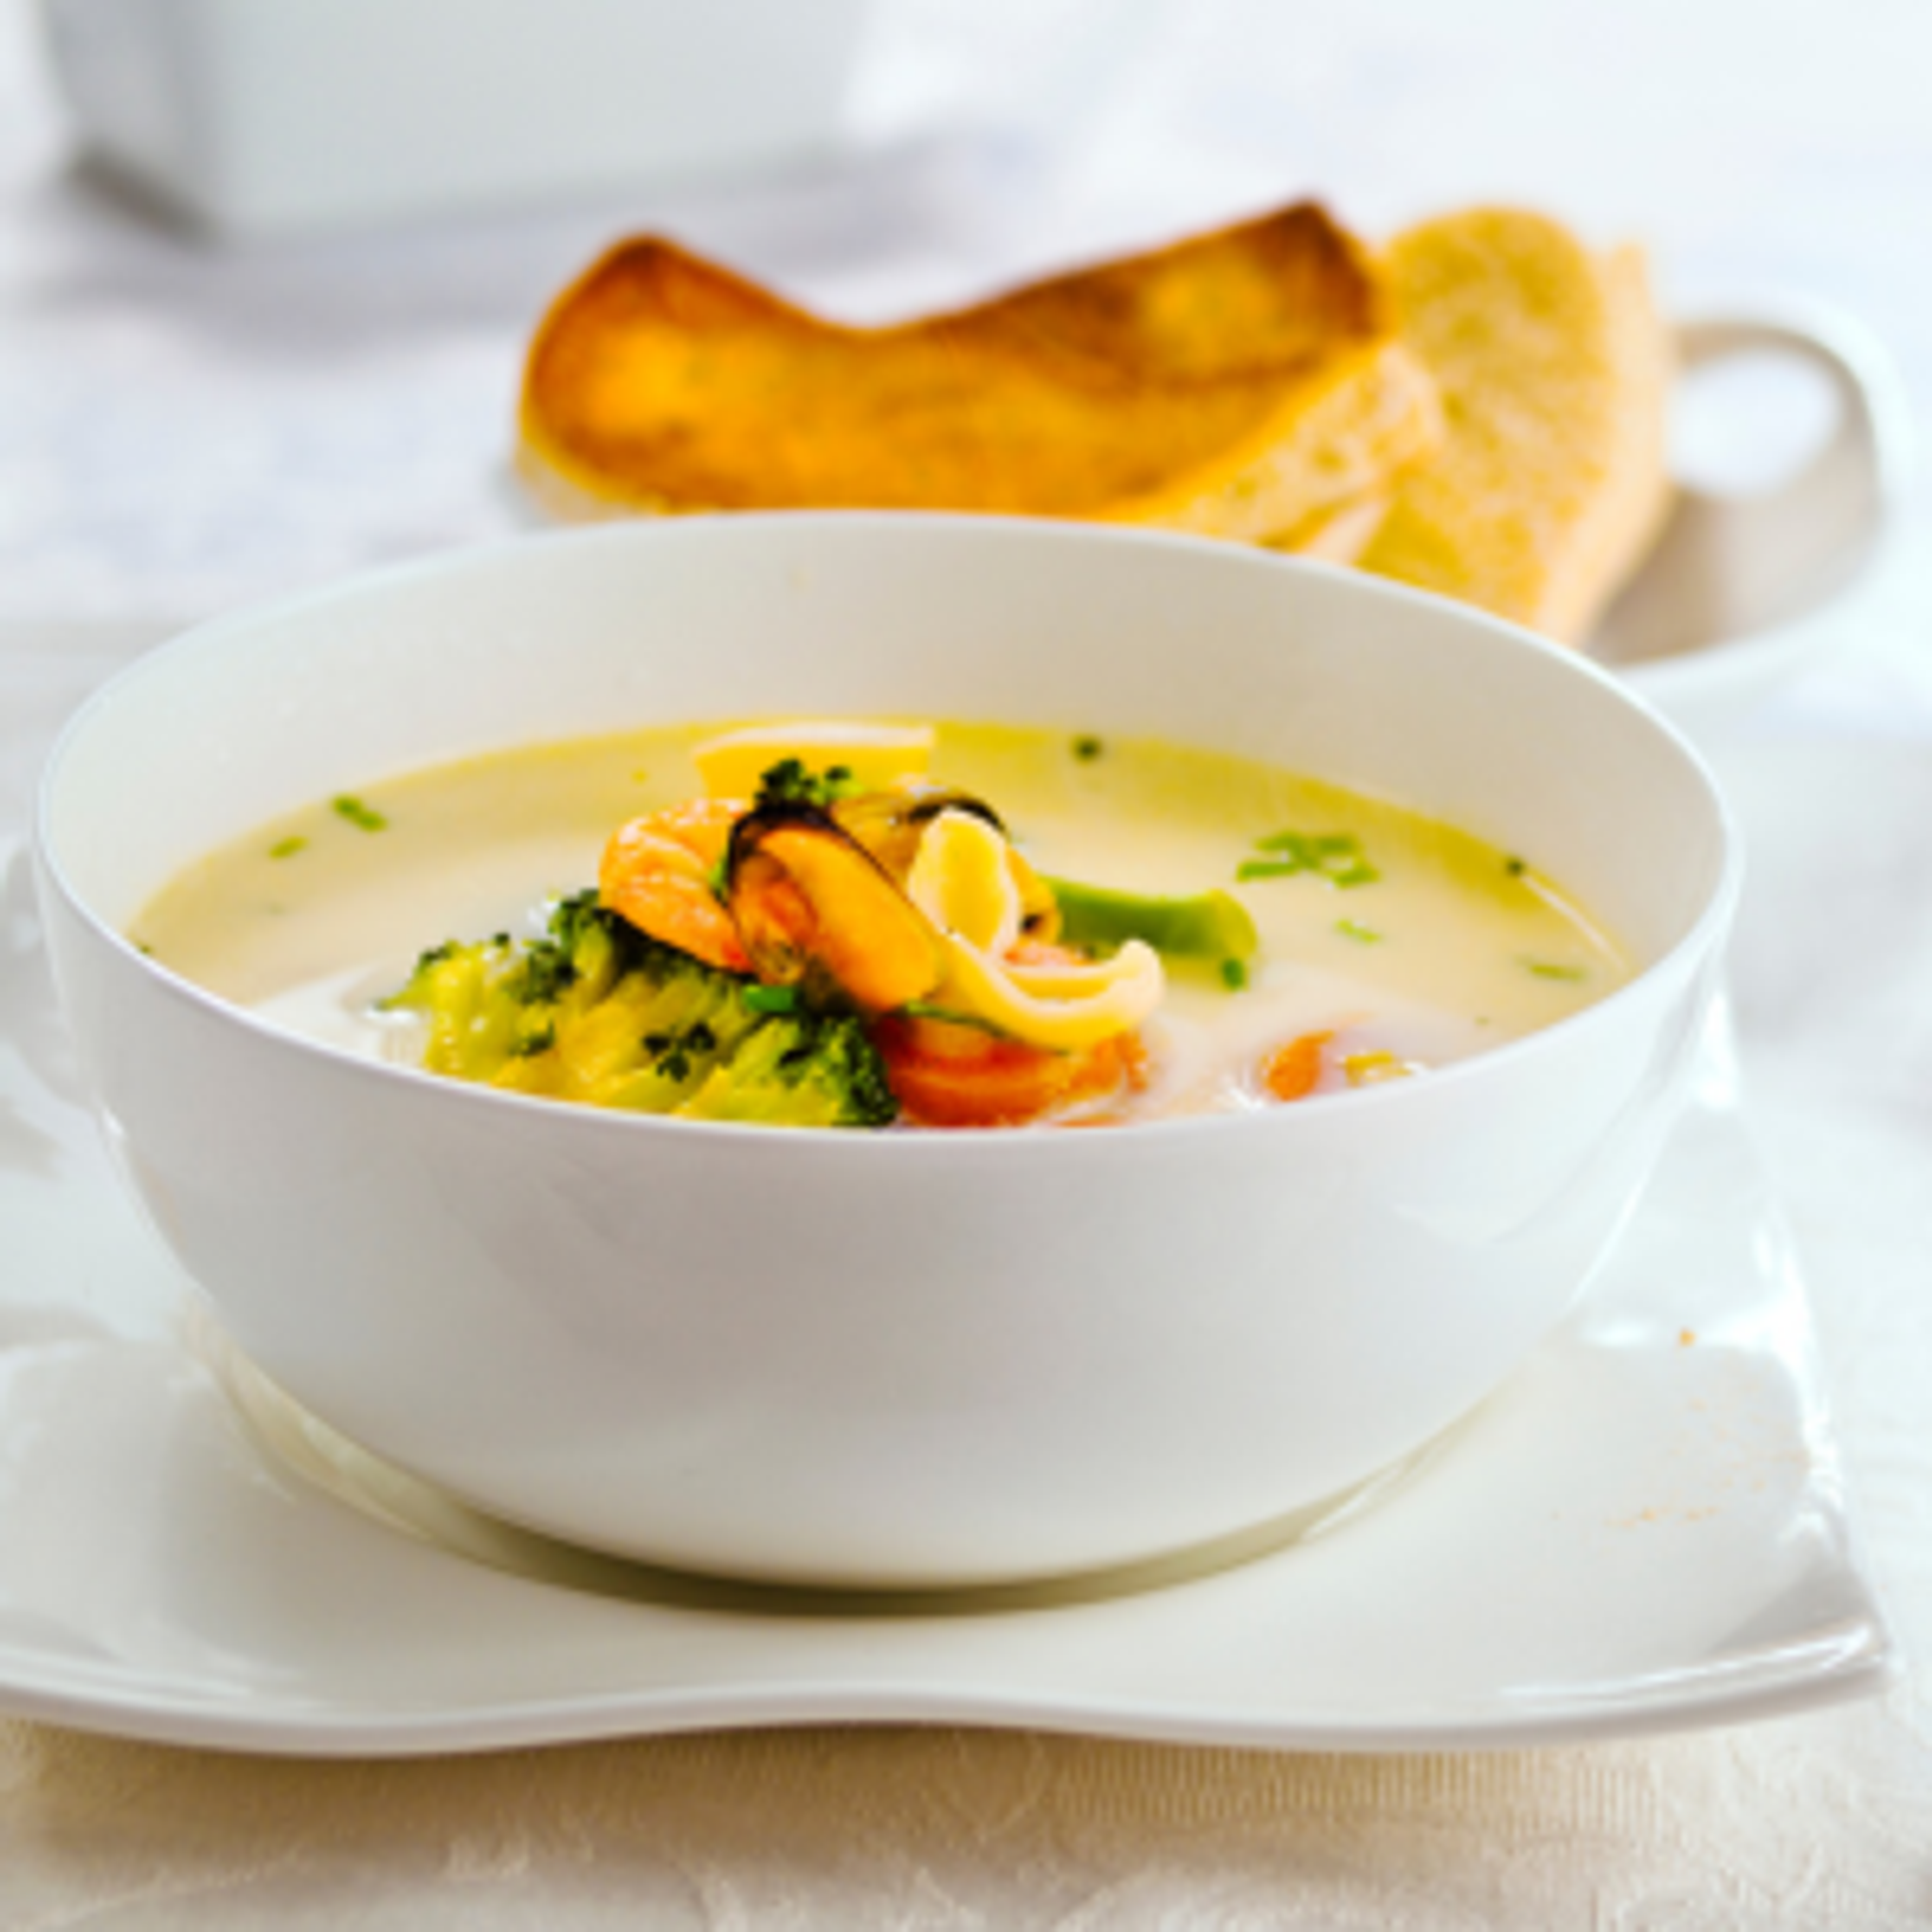 Irish Seafood Chowder, made with delicious fresh seafood